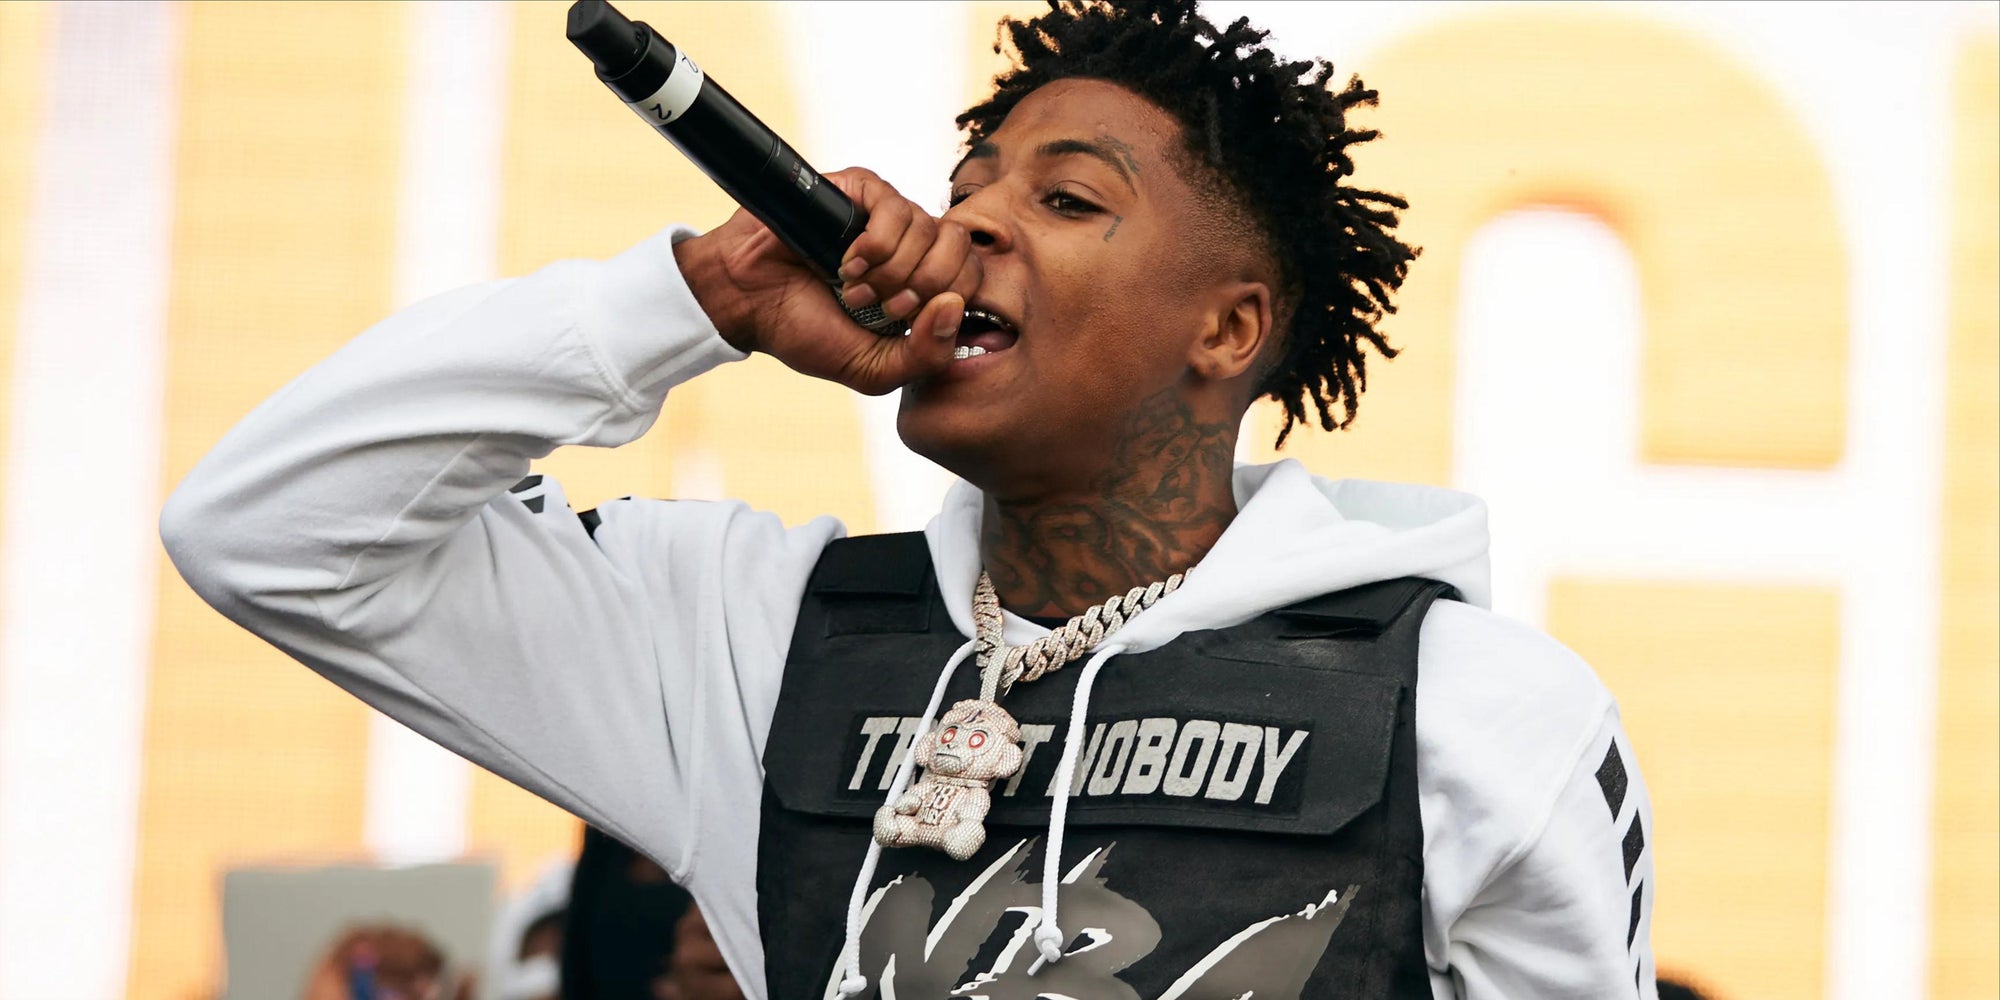 NBA YoungBoy Jewelry: What Type Of Jewelry Does NBA YoungBoy Wear?